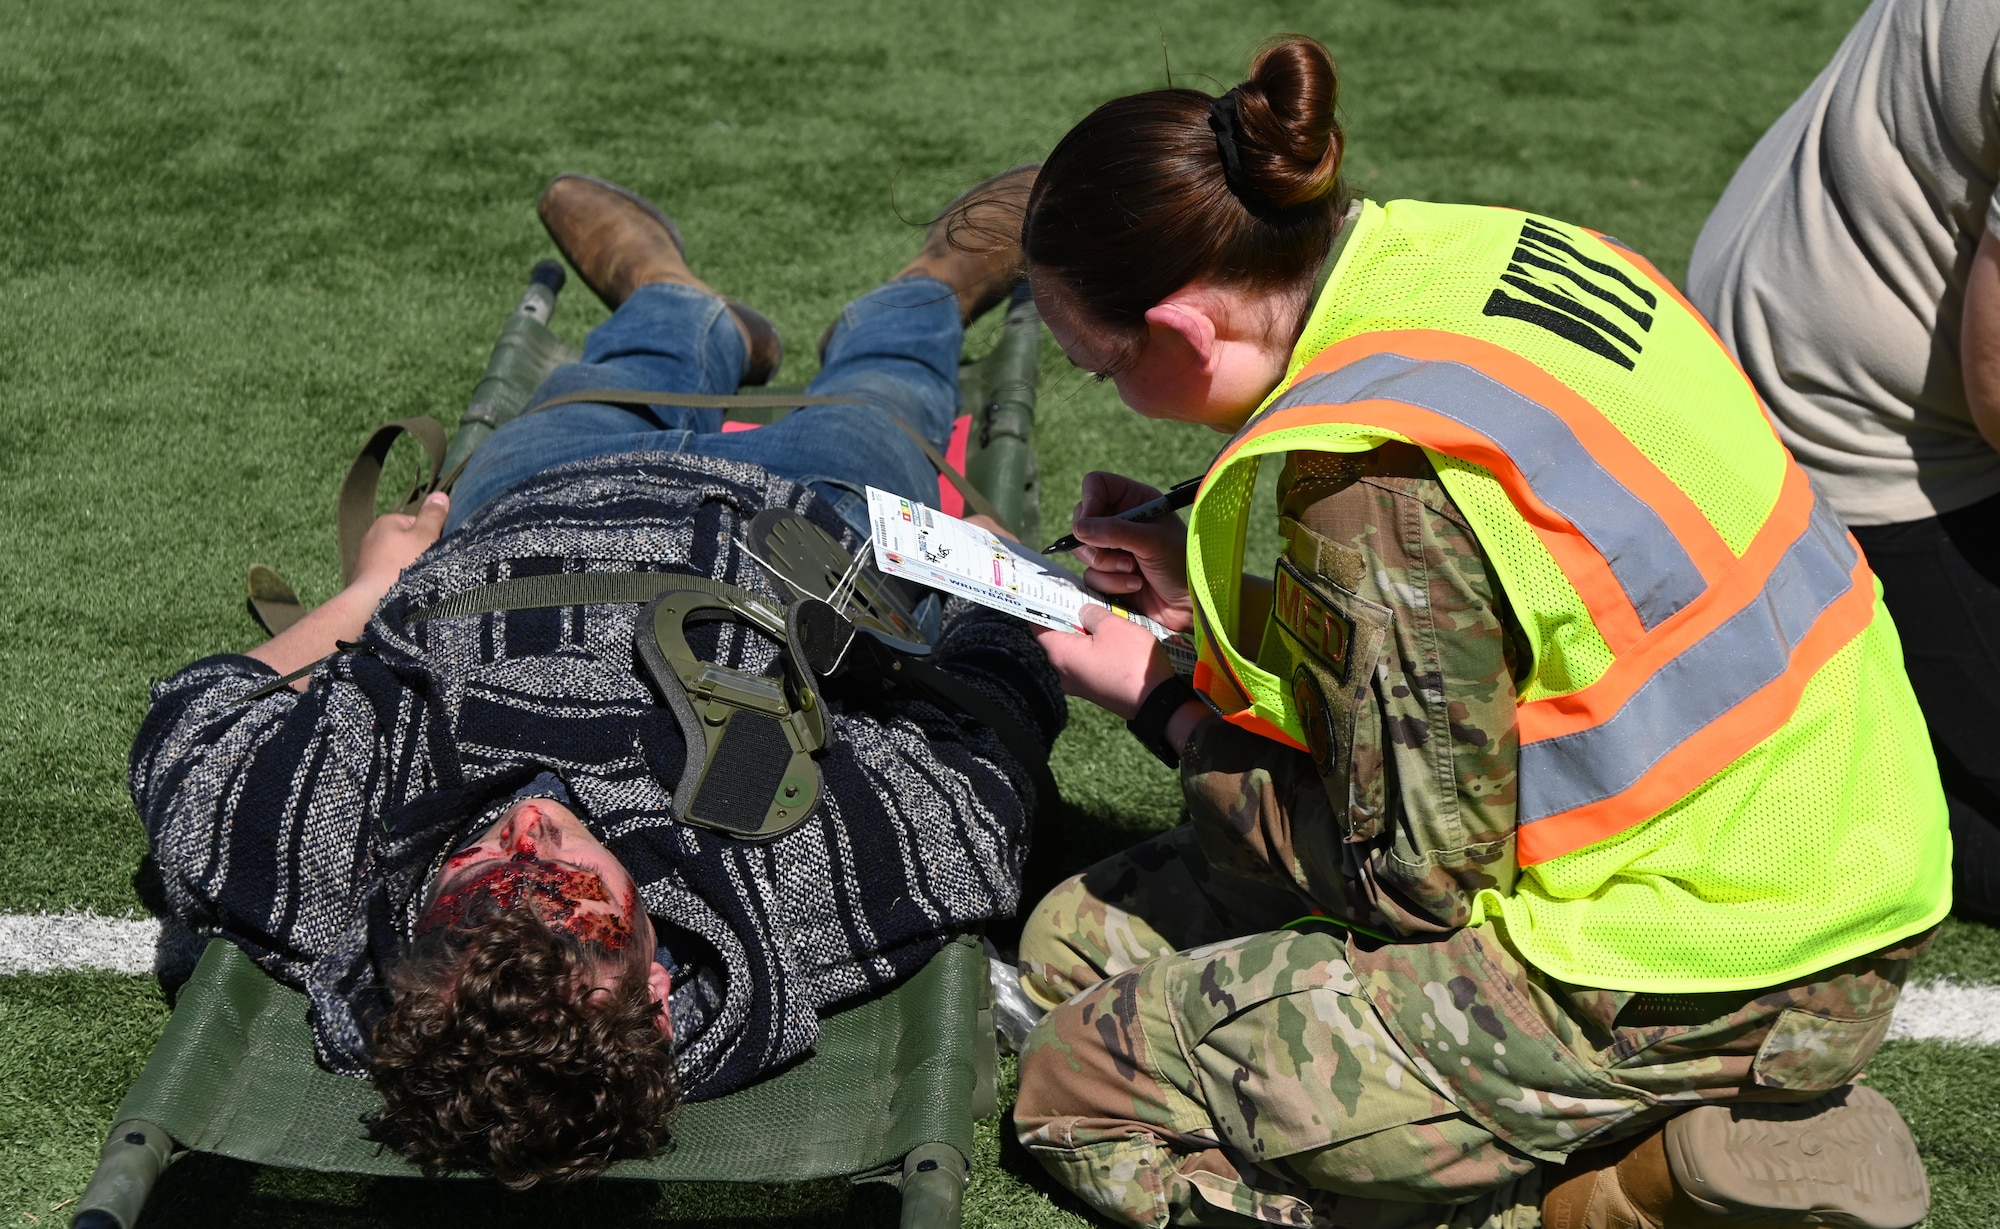 An Airman fills out a triage tag during a mass casualty exercise.